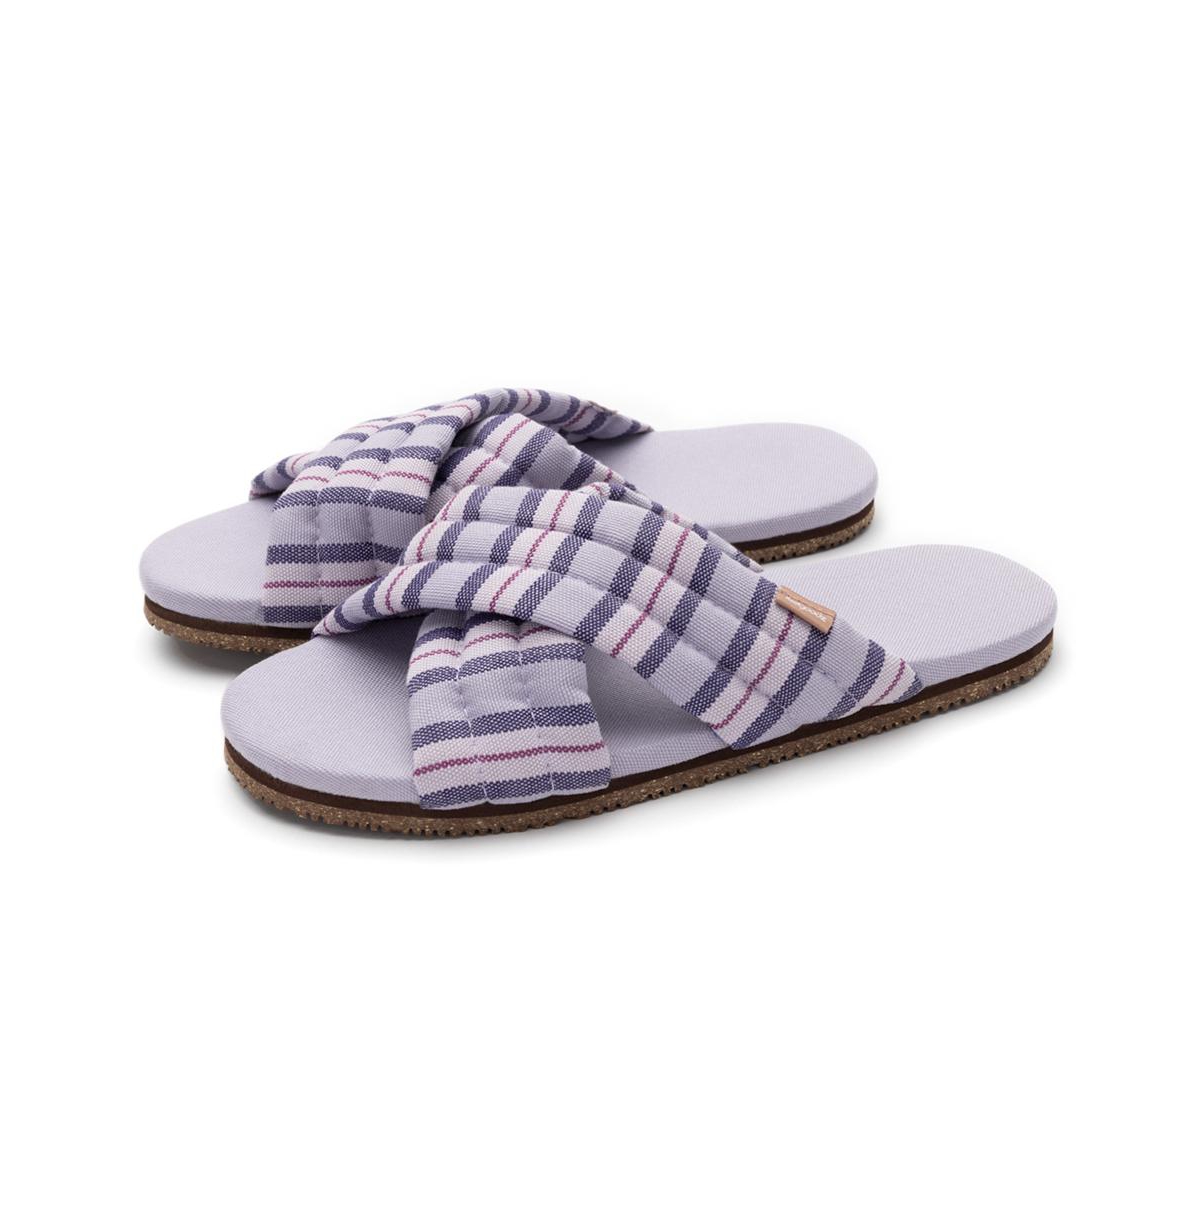 Women's Slipper Artisan Quilted Cross Strap Indoor / Outdoor House Shoes - Light/Pastel Purple